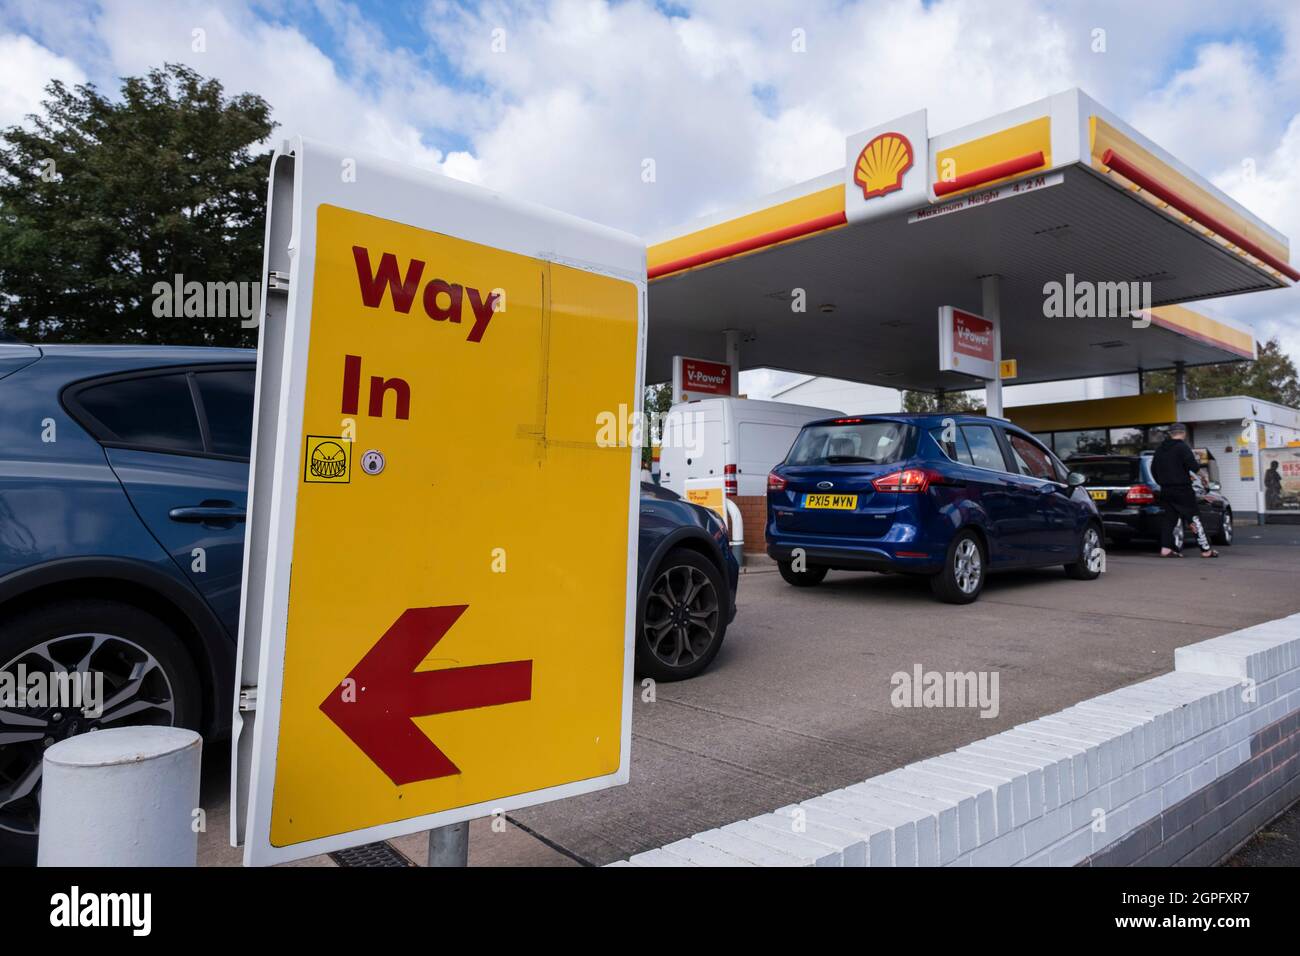 As the fuel crisis in the UK continues, this Shell petrol station is open for business, and motorists drive in with their cars to fill up with fuel, which is being sold at normal prices on 29th September 2021 in Birmingham, United Kingdom. While some forecourts remain closed with little or no fuel, there is confusion amongst the public as to whether they should buy fuel now or wait. This has led to panic buying and long queues outside some petrol stations as the crisis, which has been caused by a lack of HGV drivers available to deliver supplies, continues. Stock Photo